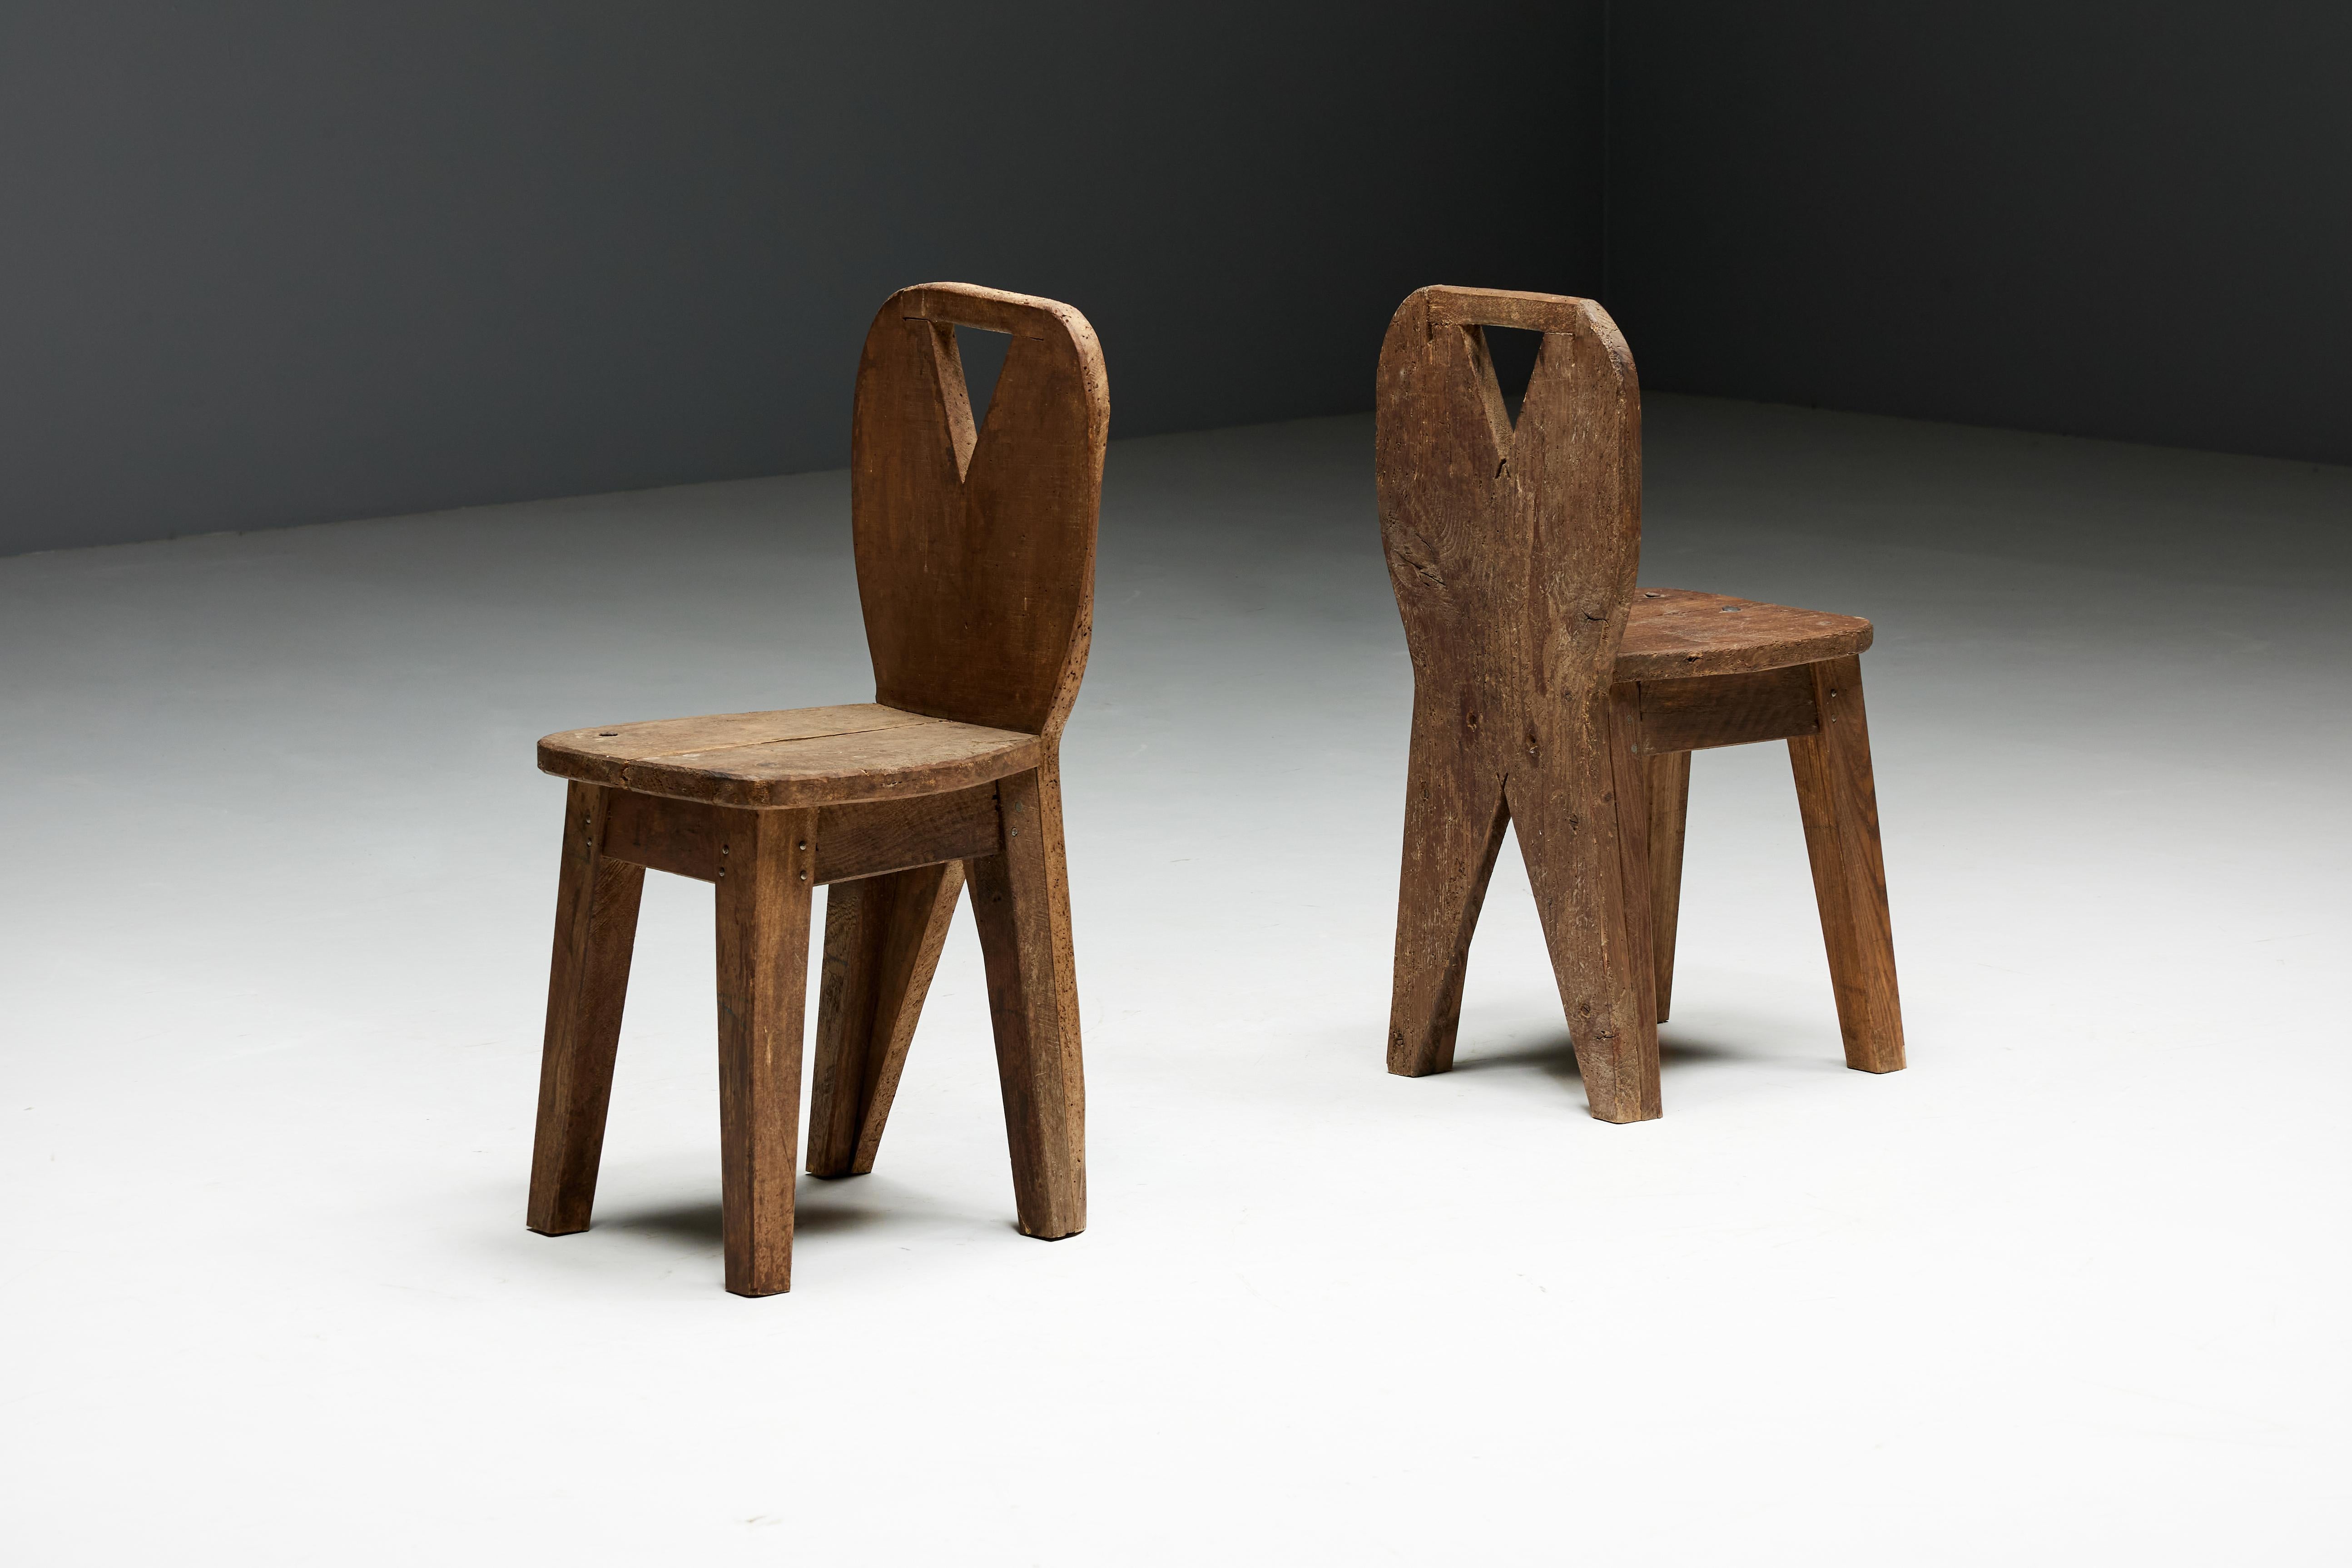 Brutalist Art Populaire Mountain Chairs, France, 1950s For Sale 1